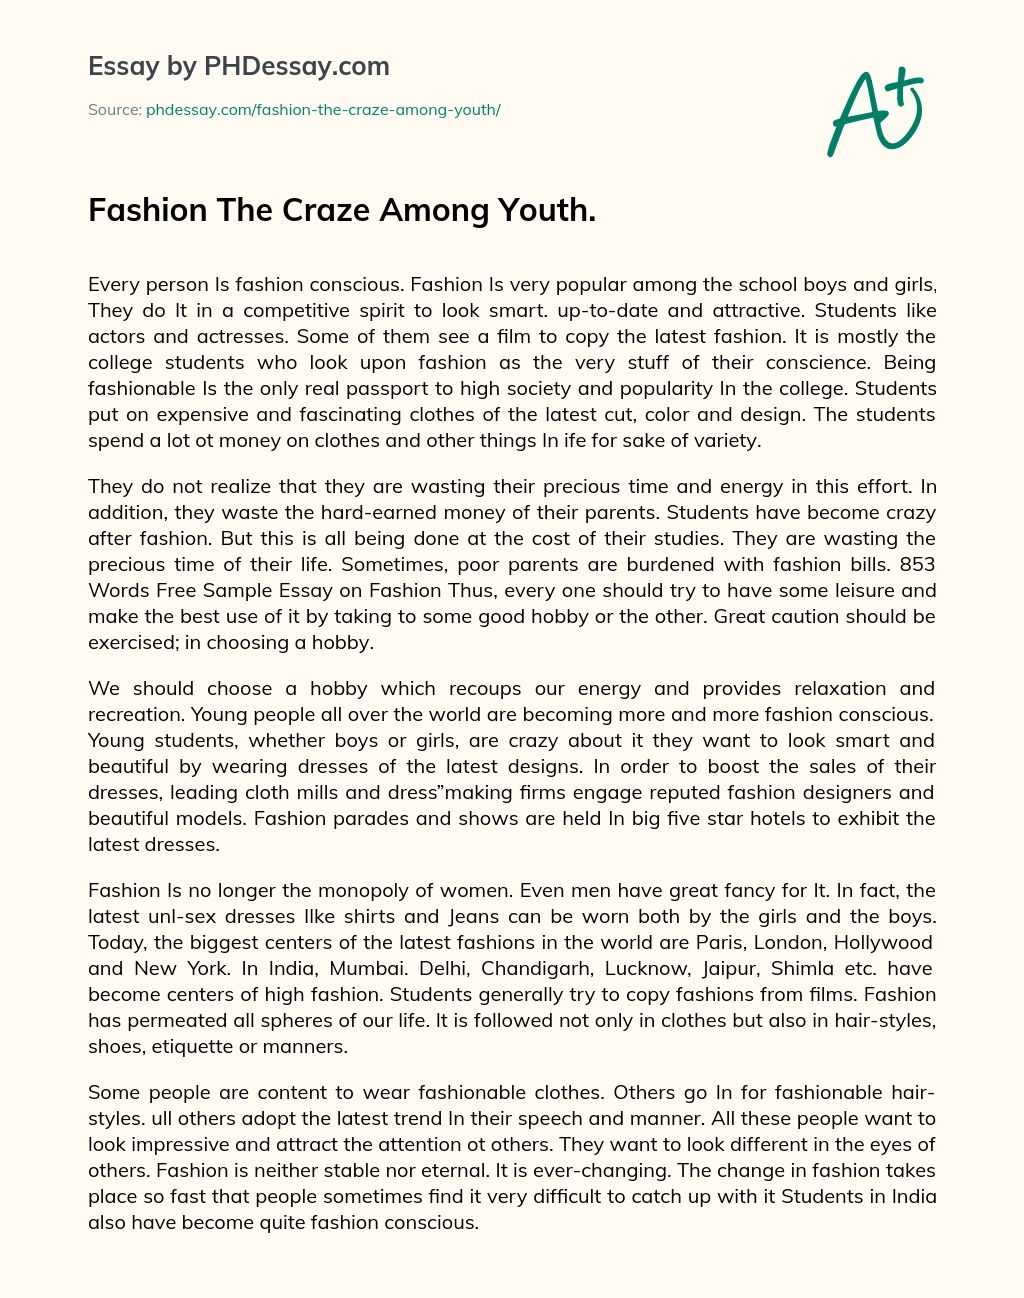 fashion and youth essay